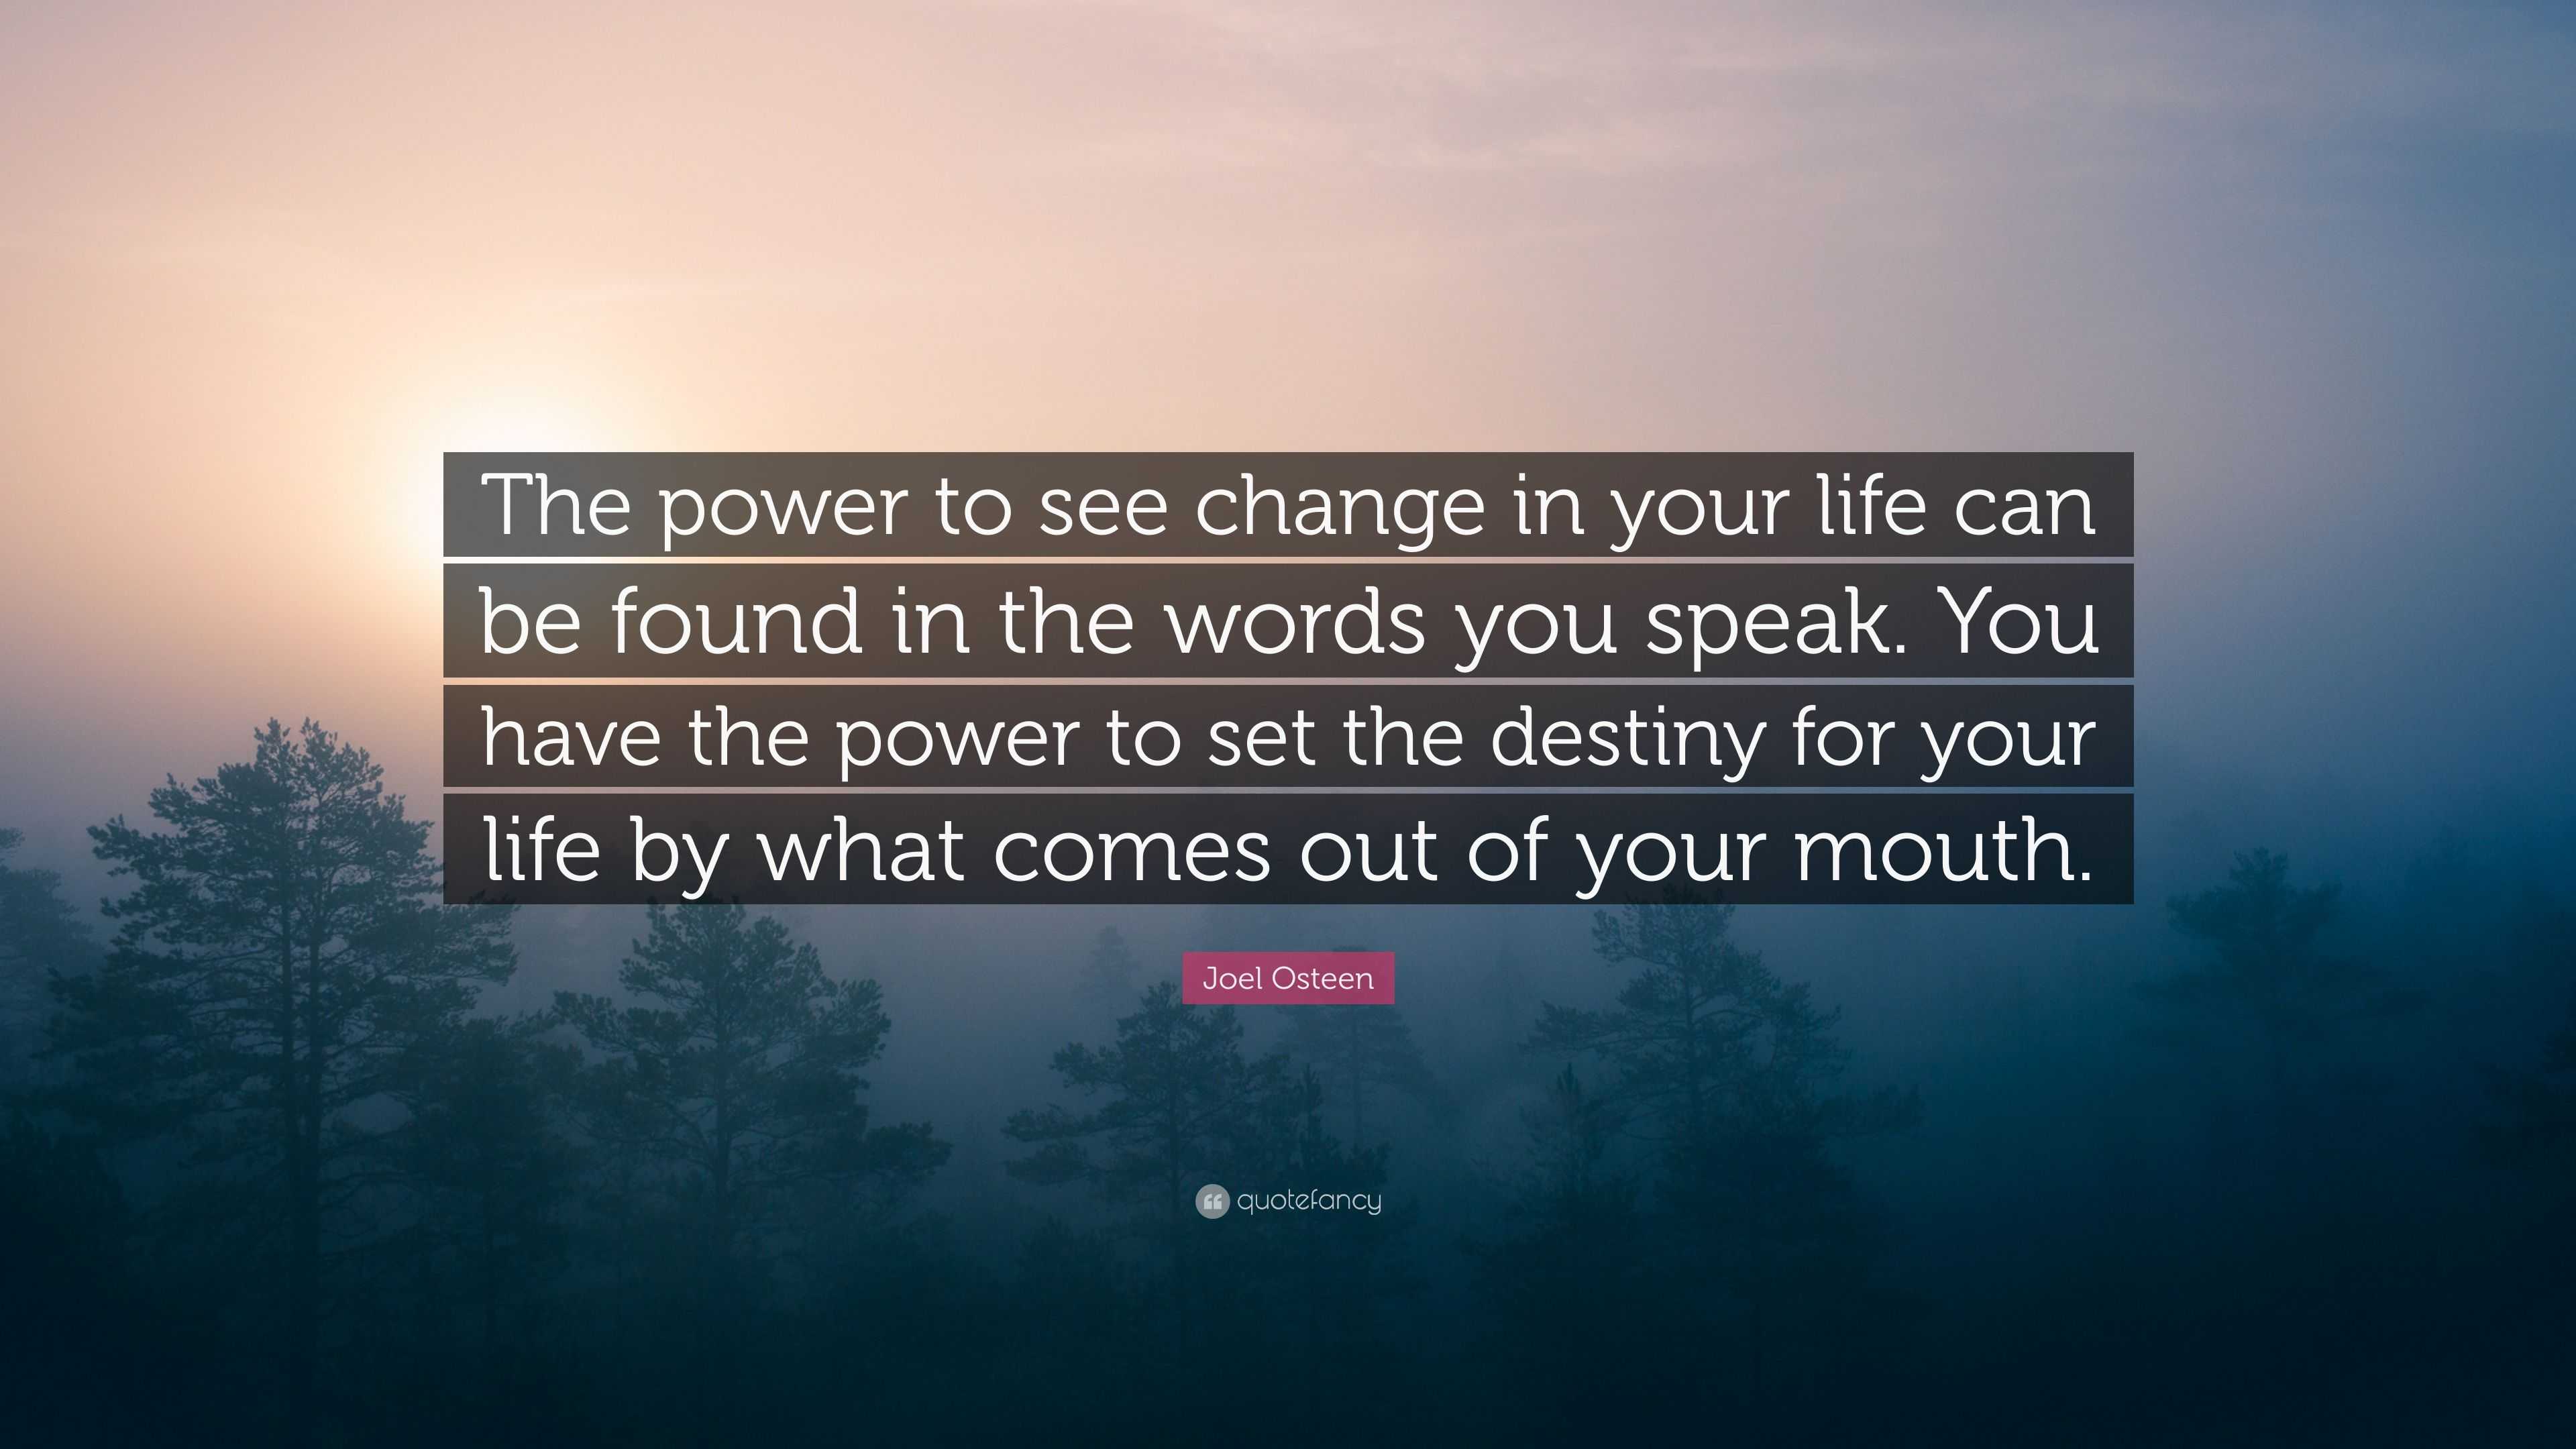 Joel Osteen Quote “The power to see change in your life can be found